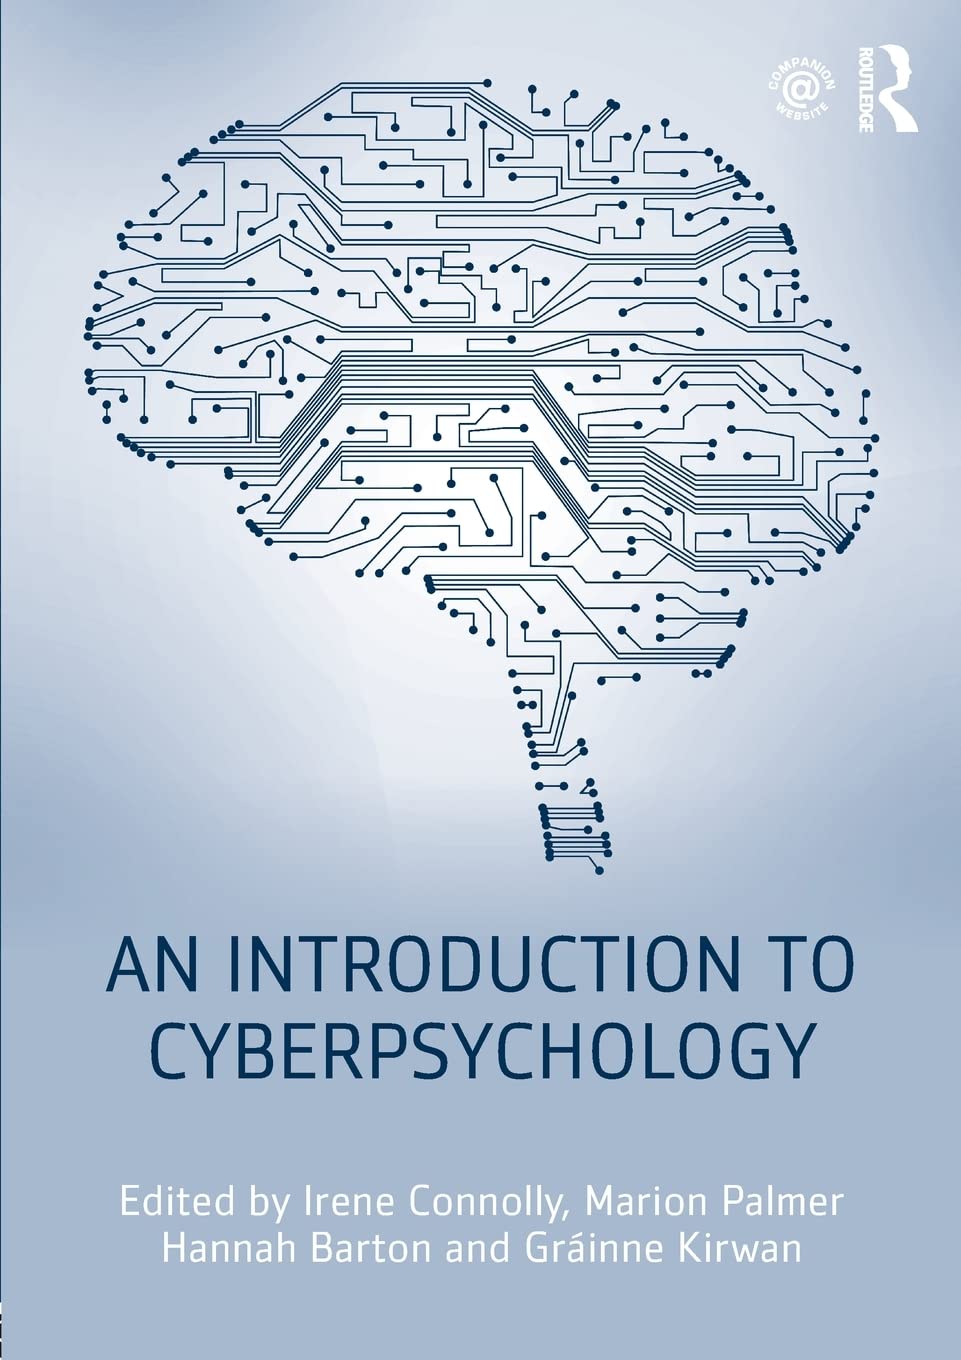 Intro to Cyberpsychology